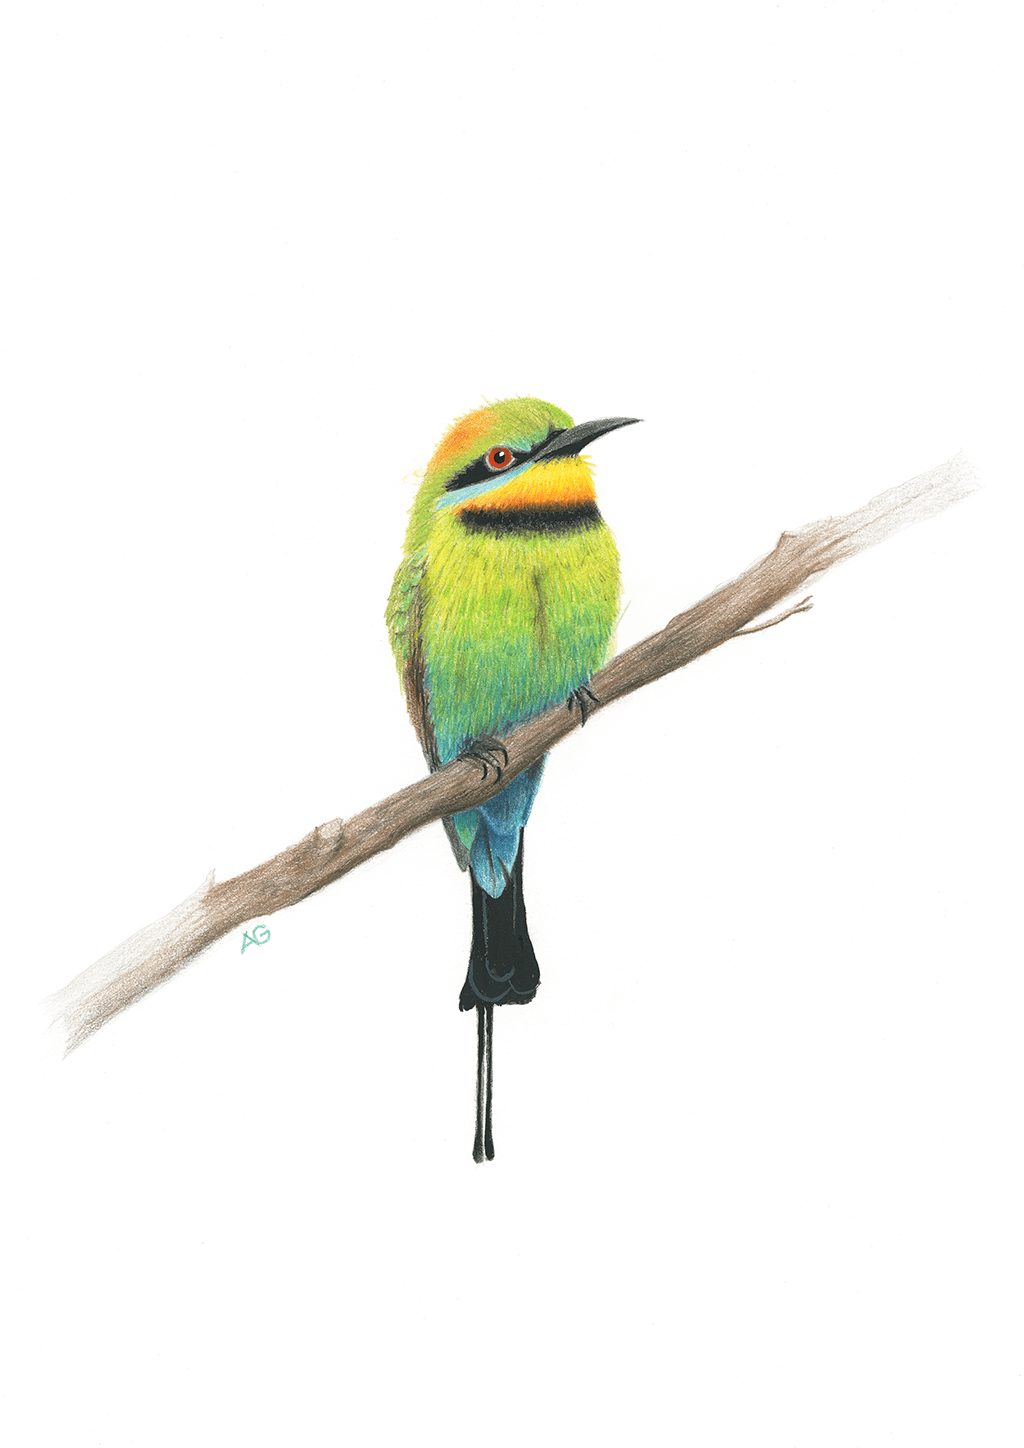 Rainbow bee-eater bird gouache painting and colour pencil drawing on high quality 300gsm watercolour paper